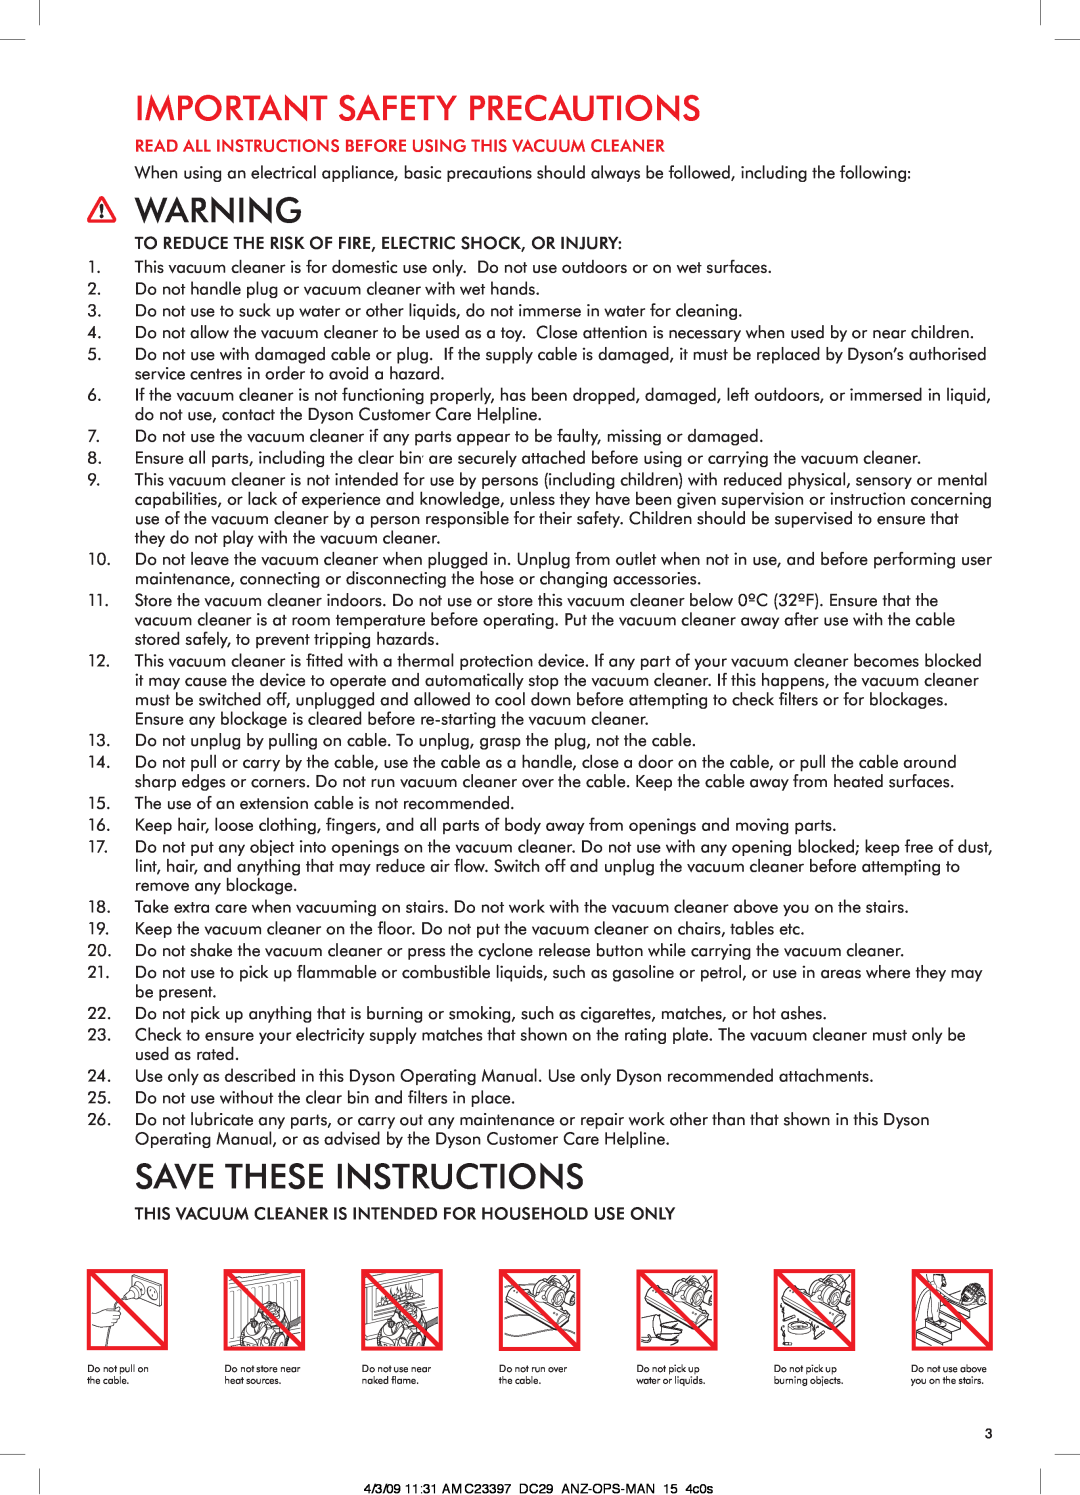 Dyson DC29 Important Safety Precautions, Save These Instructions, Read All Instructions Before Using This Vacuum Cleaner 